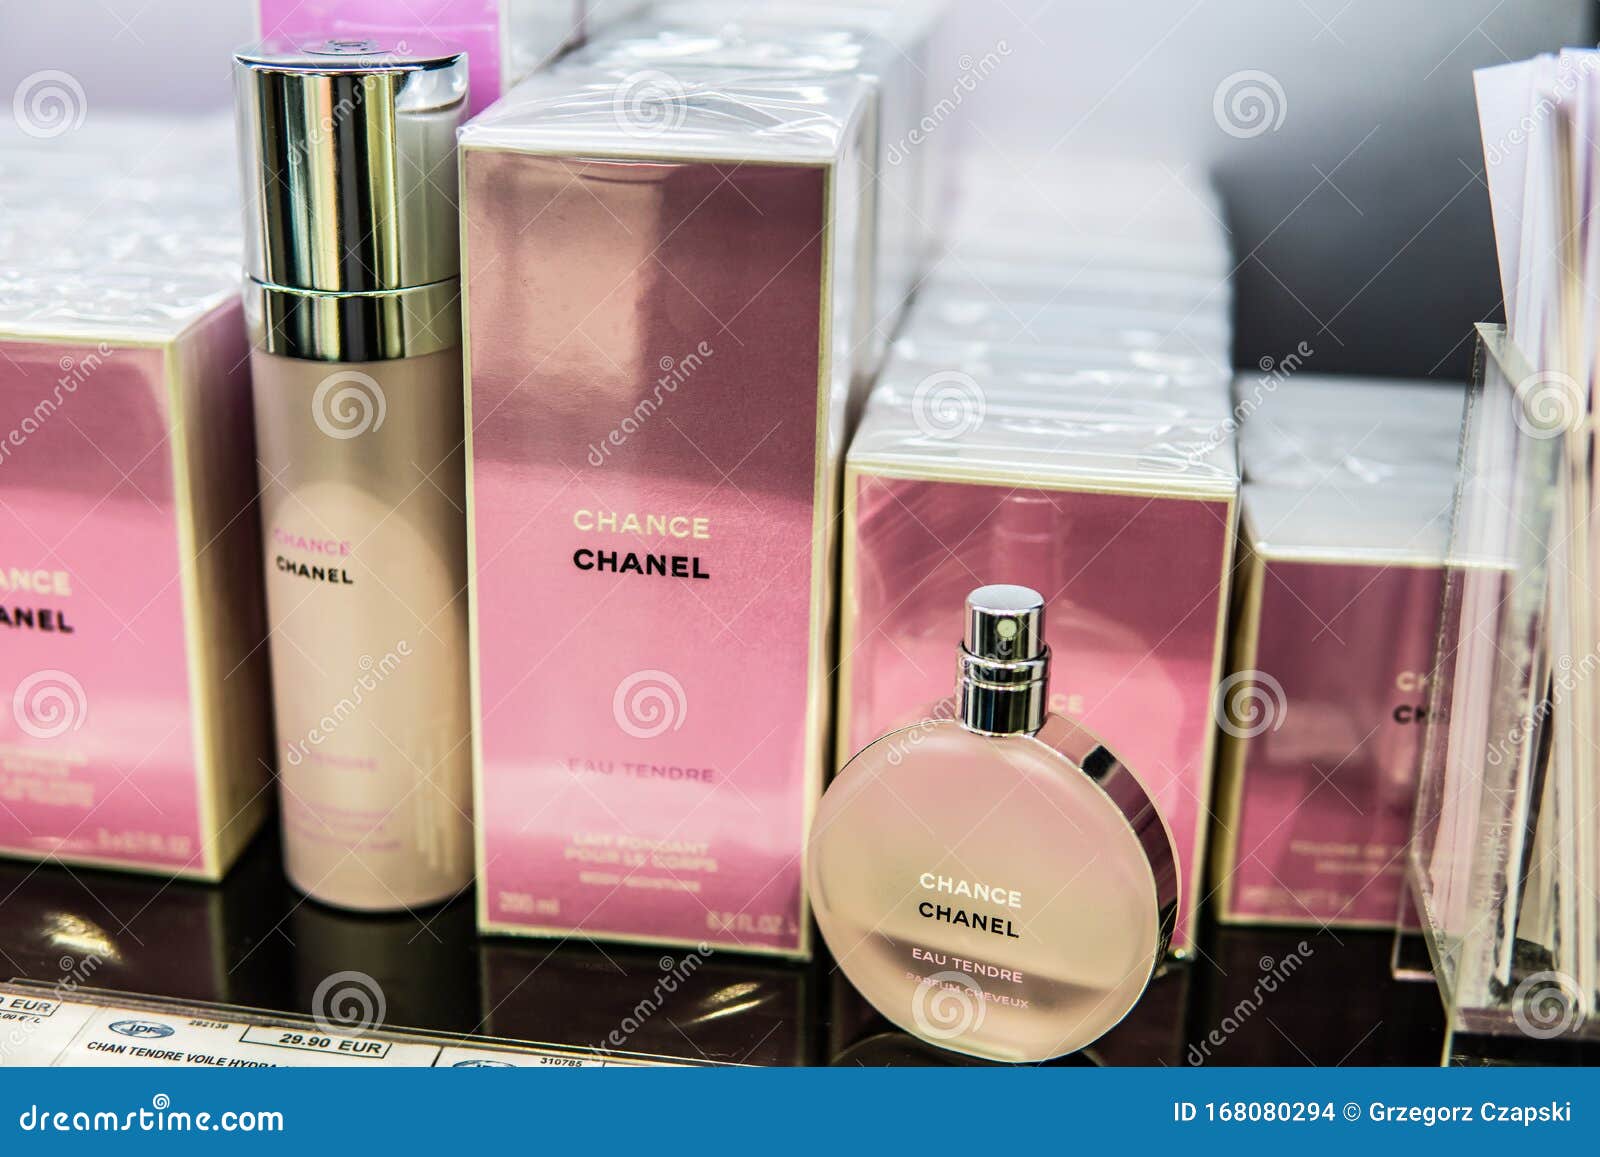 Chanel Chance Perfume on Shop Display for Sale, Fragrance Launched